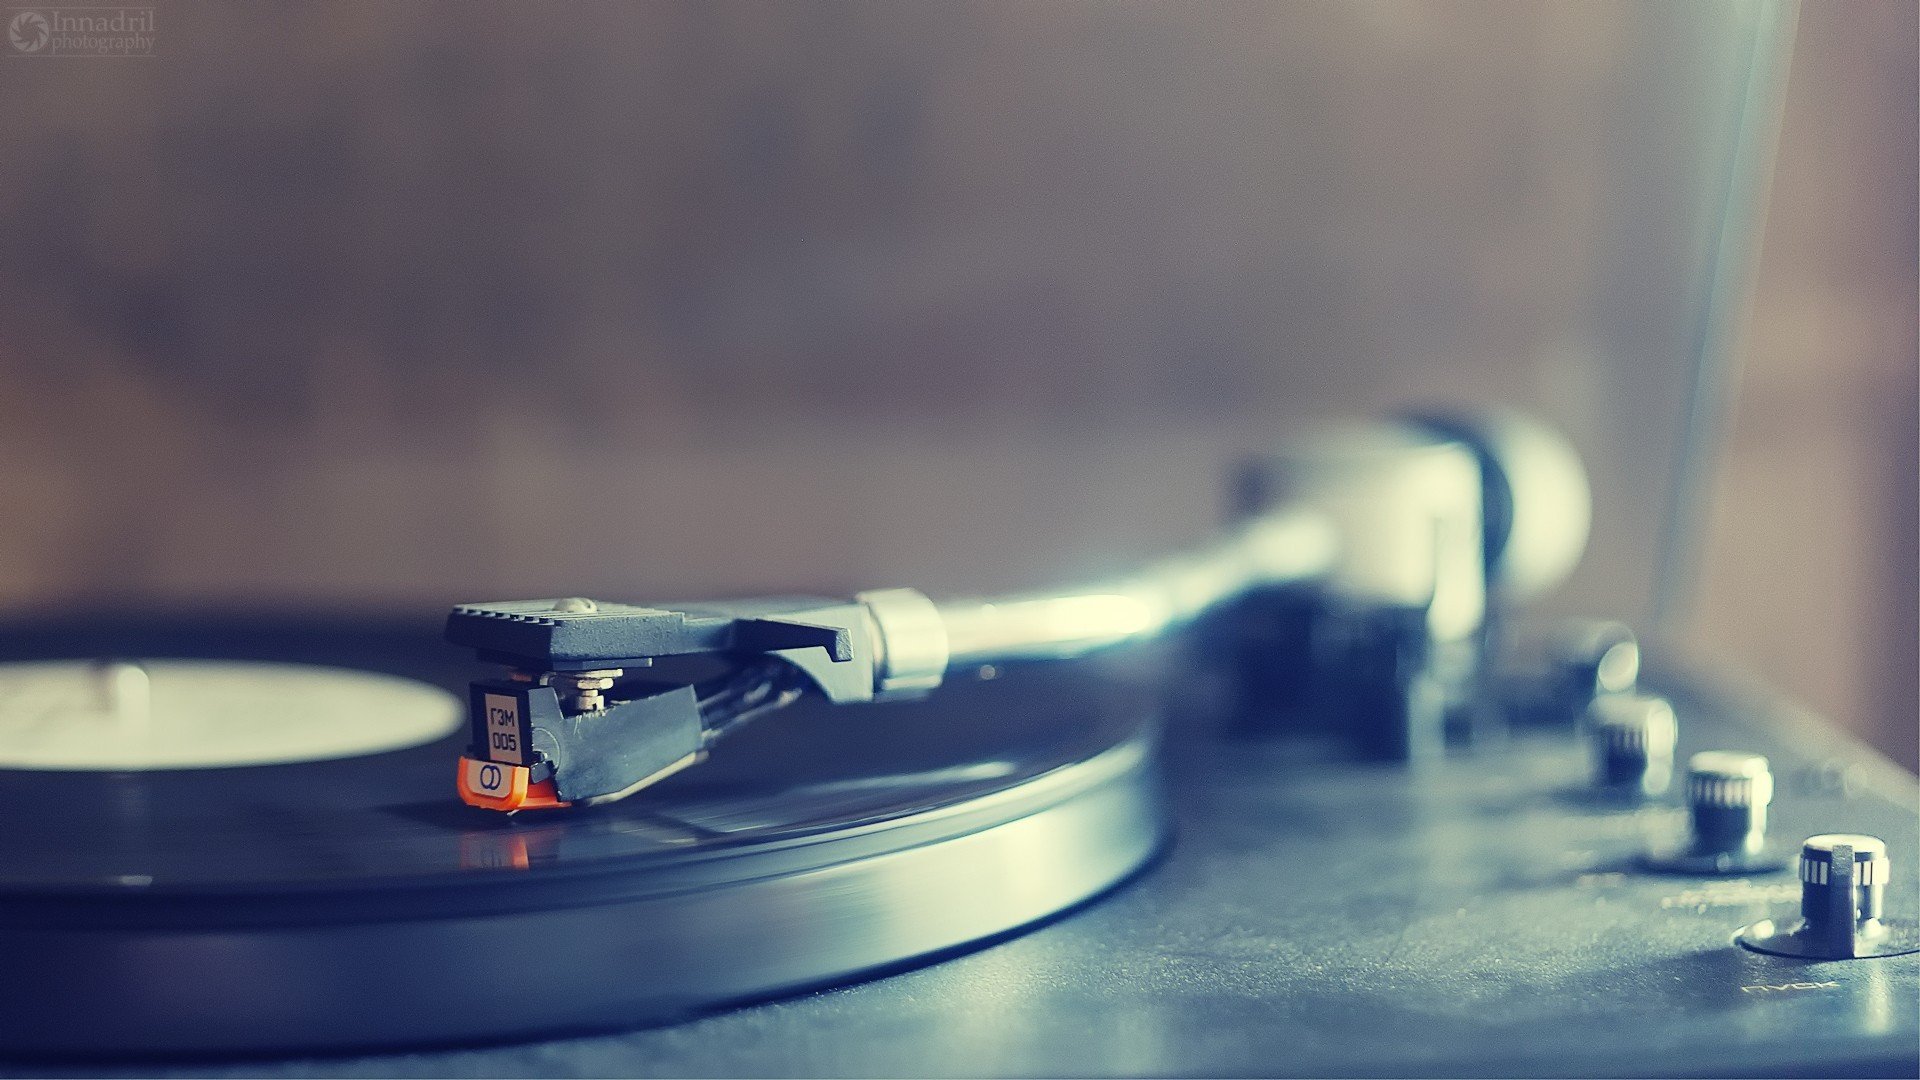 Record Player Photos Download The BEST Free Record Player Stock Photos   HD Images